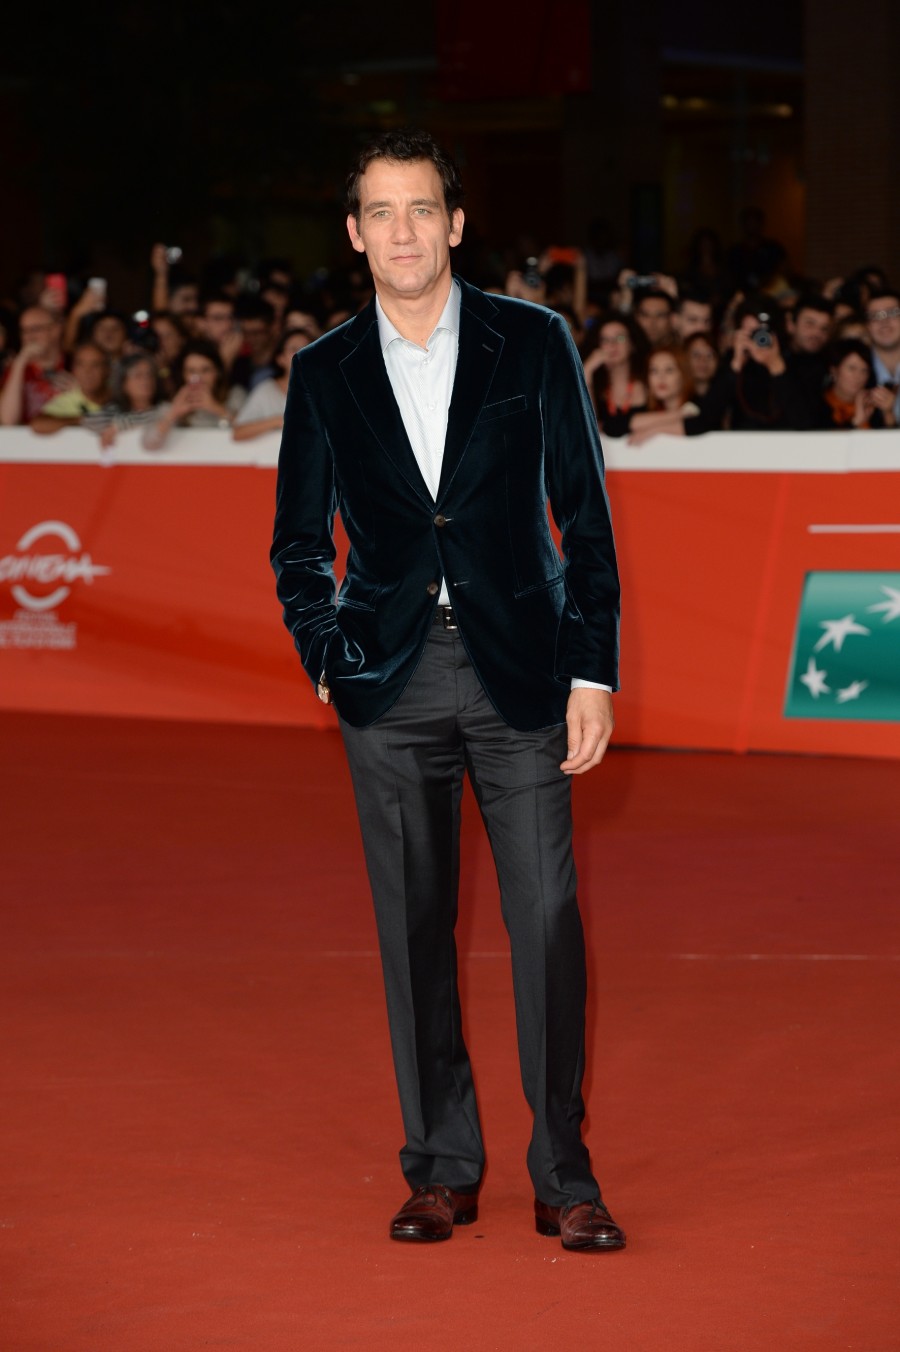 Promoting 'The Knick' during the Rome Film Festival, actor Clive Owen attended an October 17th screening of the Steven Soderbergh television series. For the fine evening out, Owen wore a Giorgio Armani green velvet jacket with a dress shirt and gray trousers.